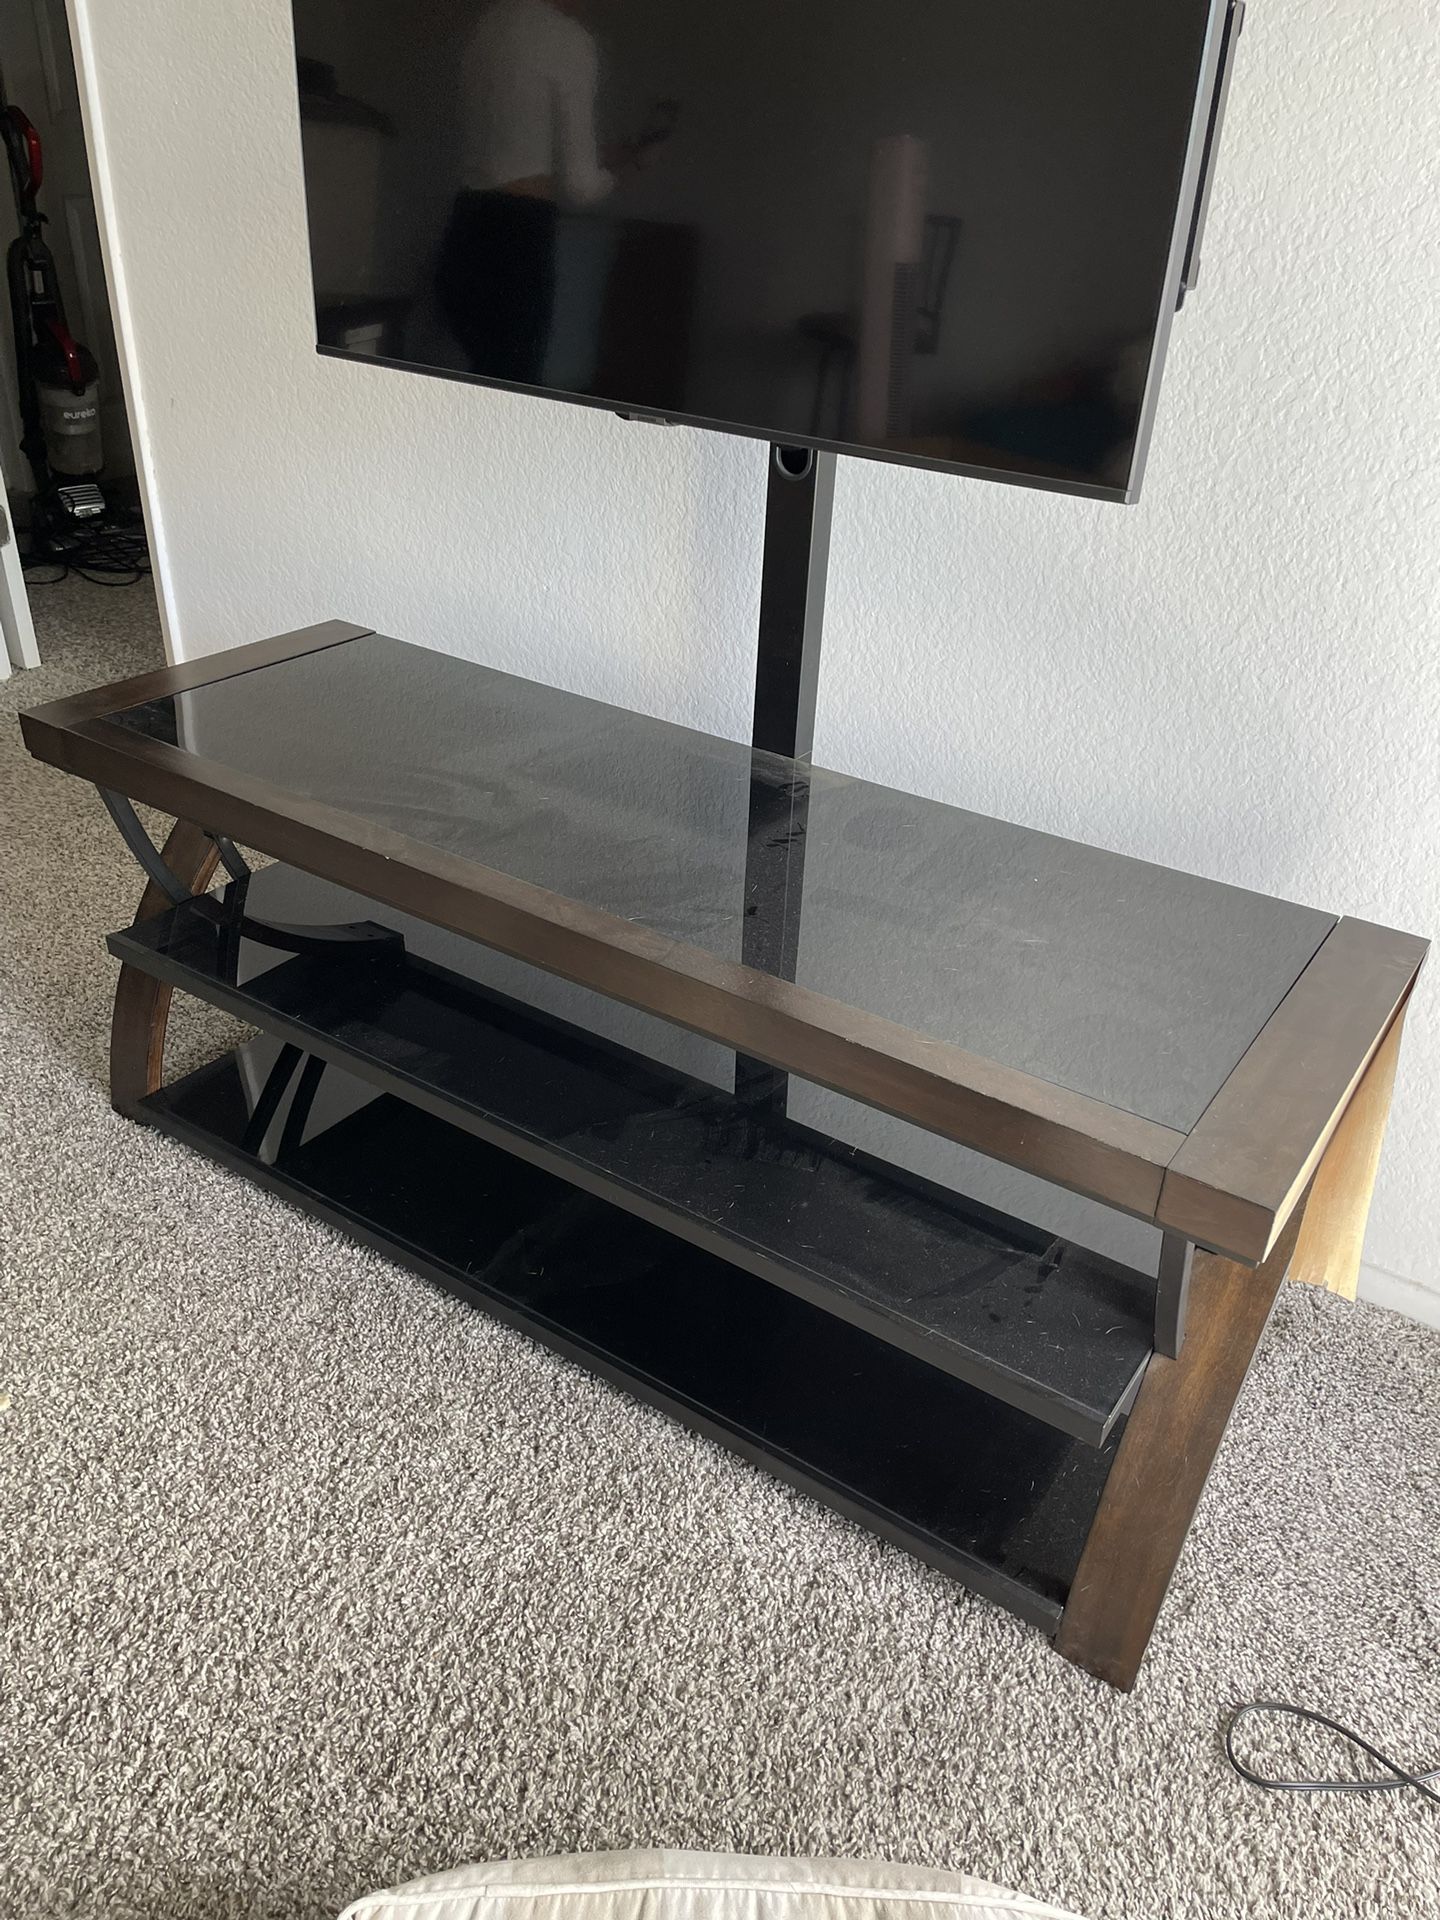 56” Long TV Stand 